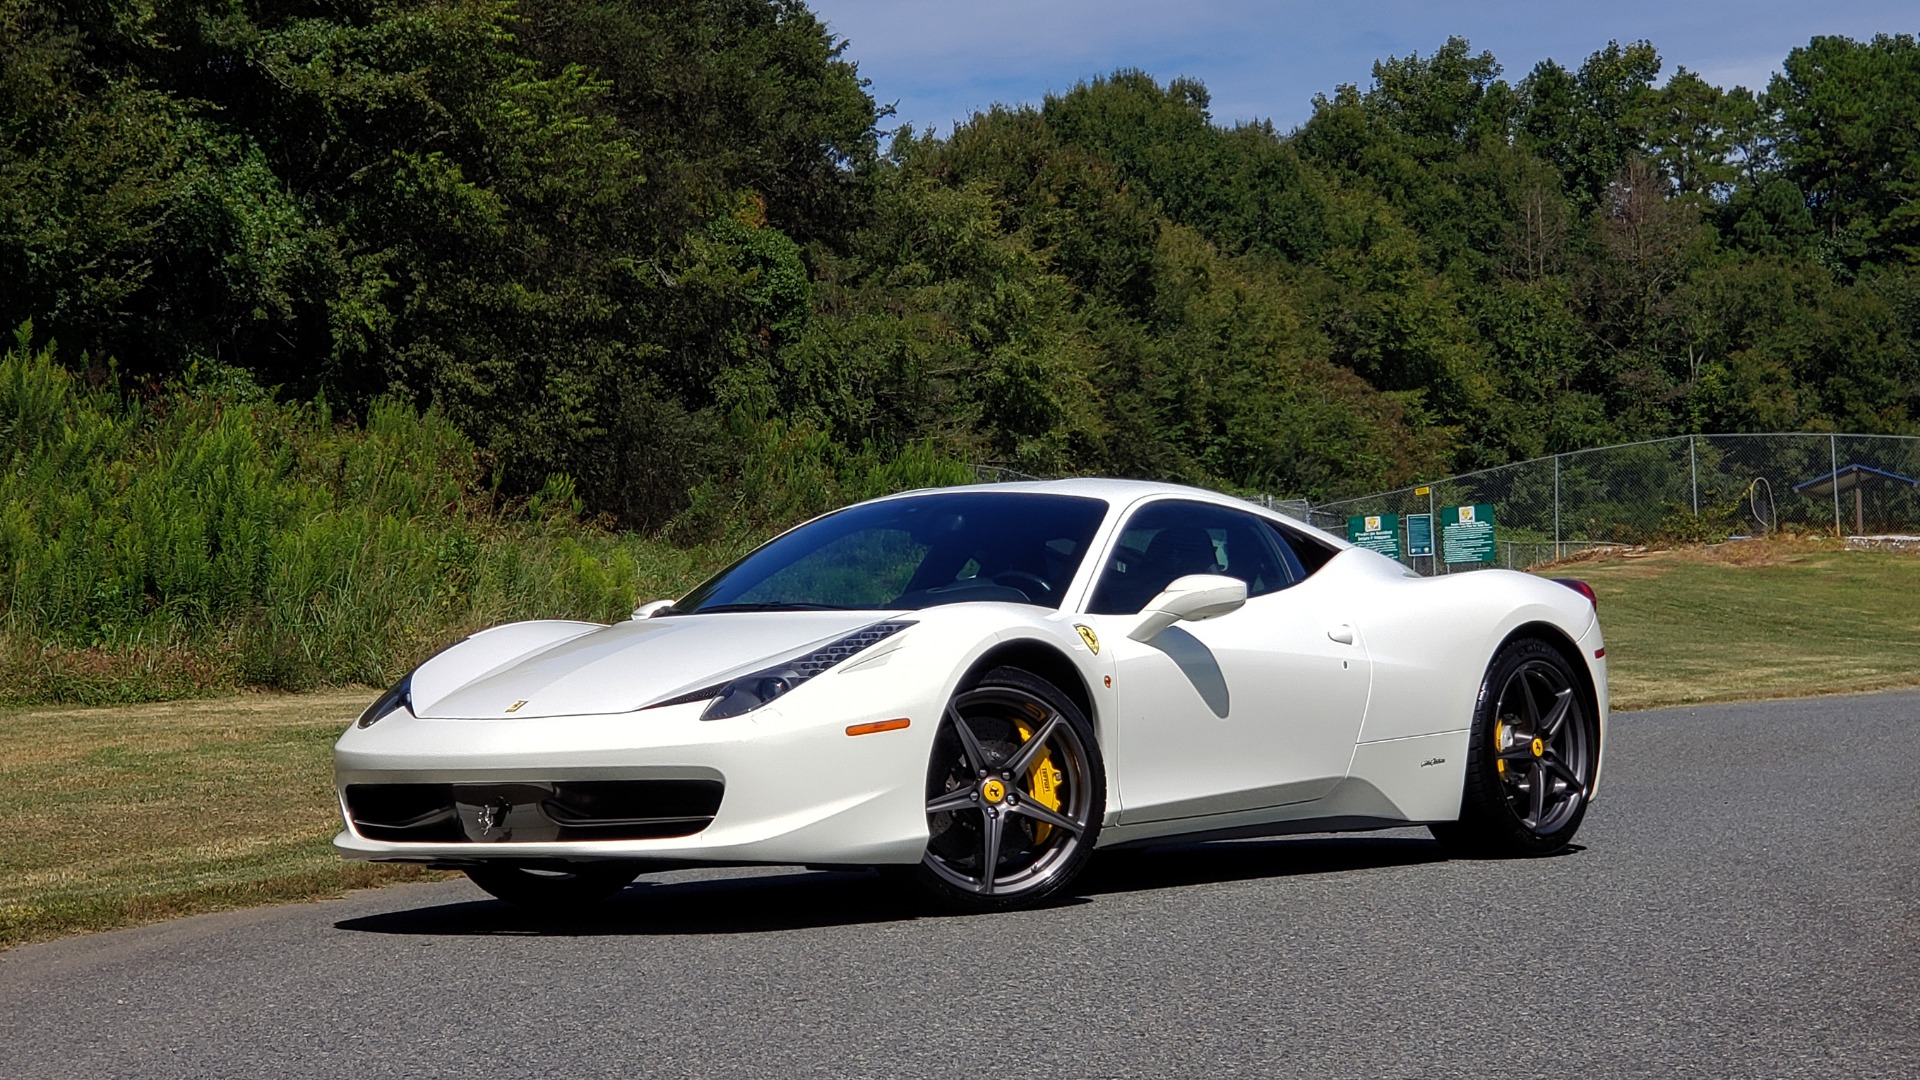 Used 2012 Ferrari 458 ITALIA COUPE / 4.5L V8 / 7-SPEED AUTO / LOW MILES SUPER CLEAN for sale Sold at Formula Imports in Charlotte NC 28227 3